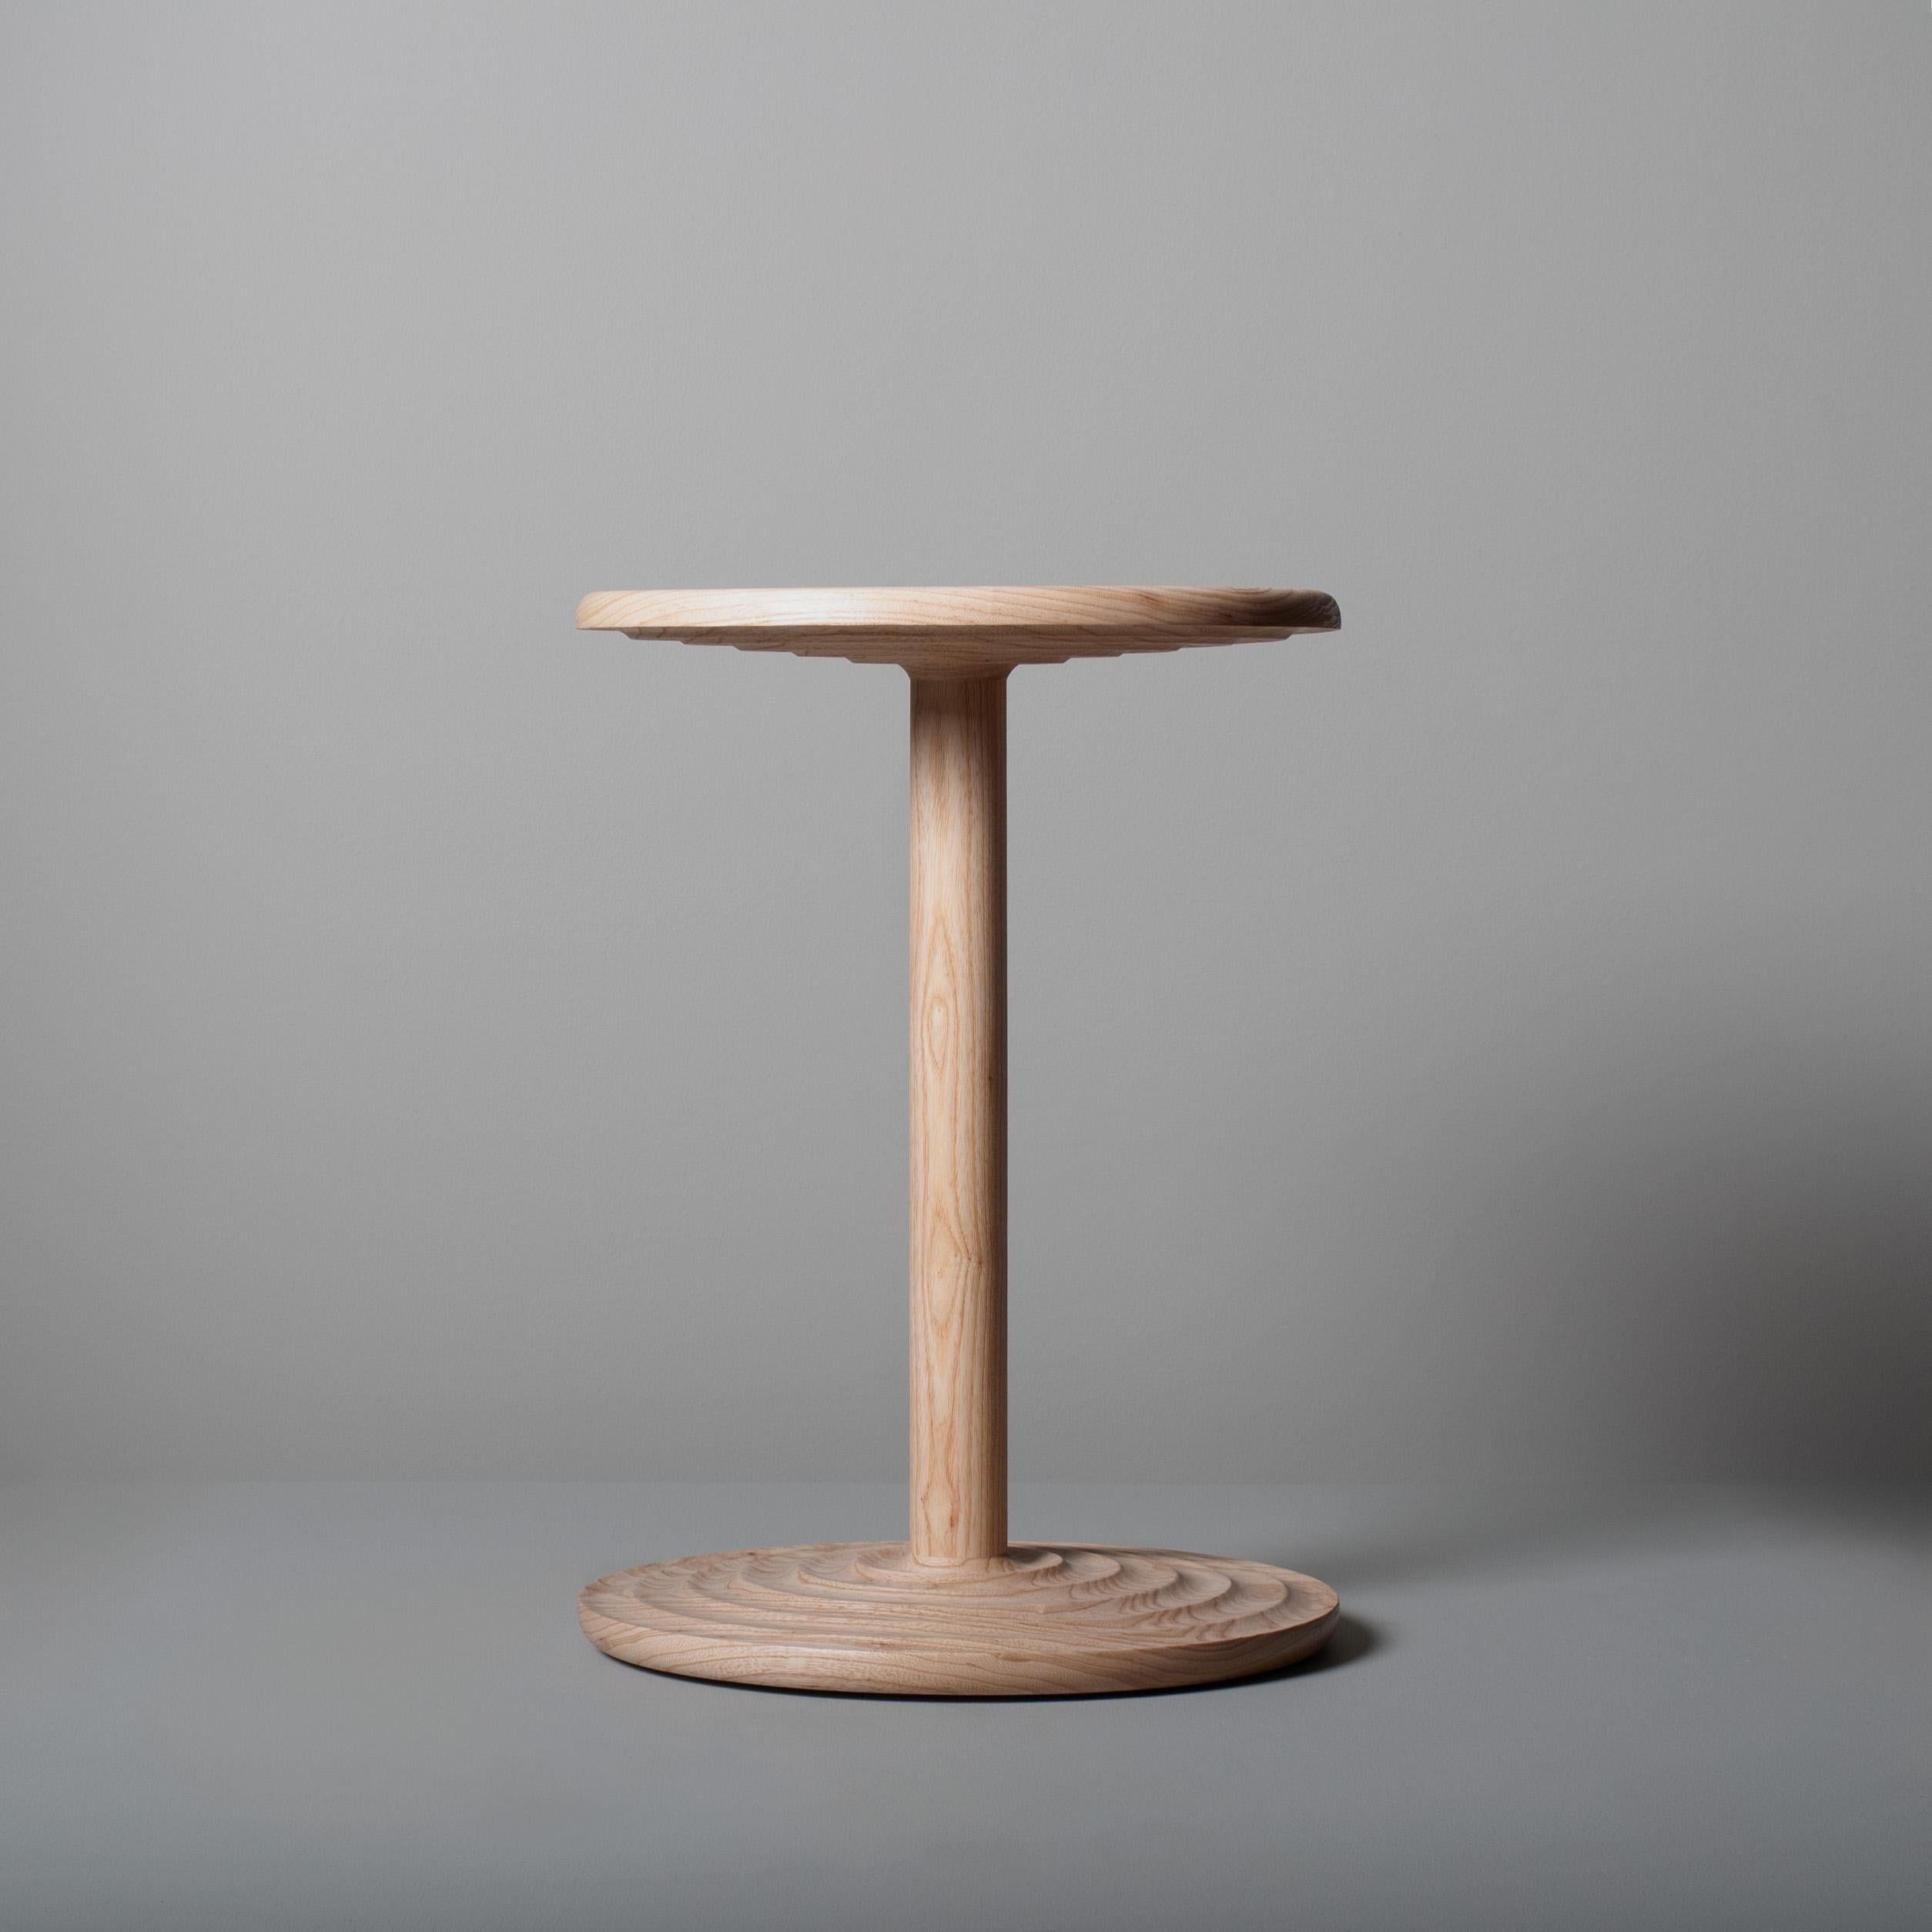 Beautifully hand-turned and handcrafted large version of our white ash rippled side table. Wonderful form and scale. This is a bespoke piece of fine quality, handmade in London by our craftsman using solid English ash timber. 
Other timbers are